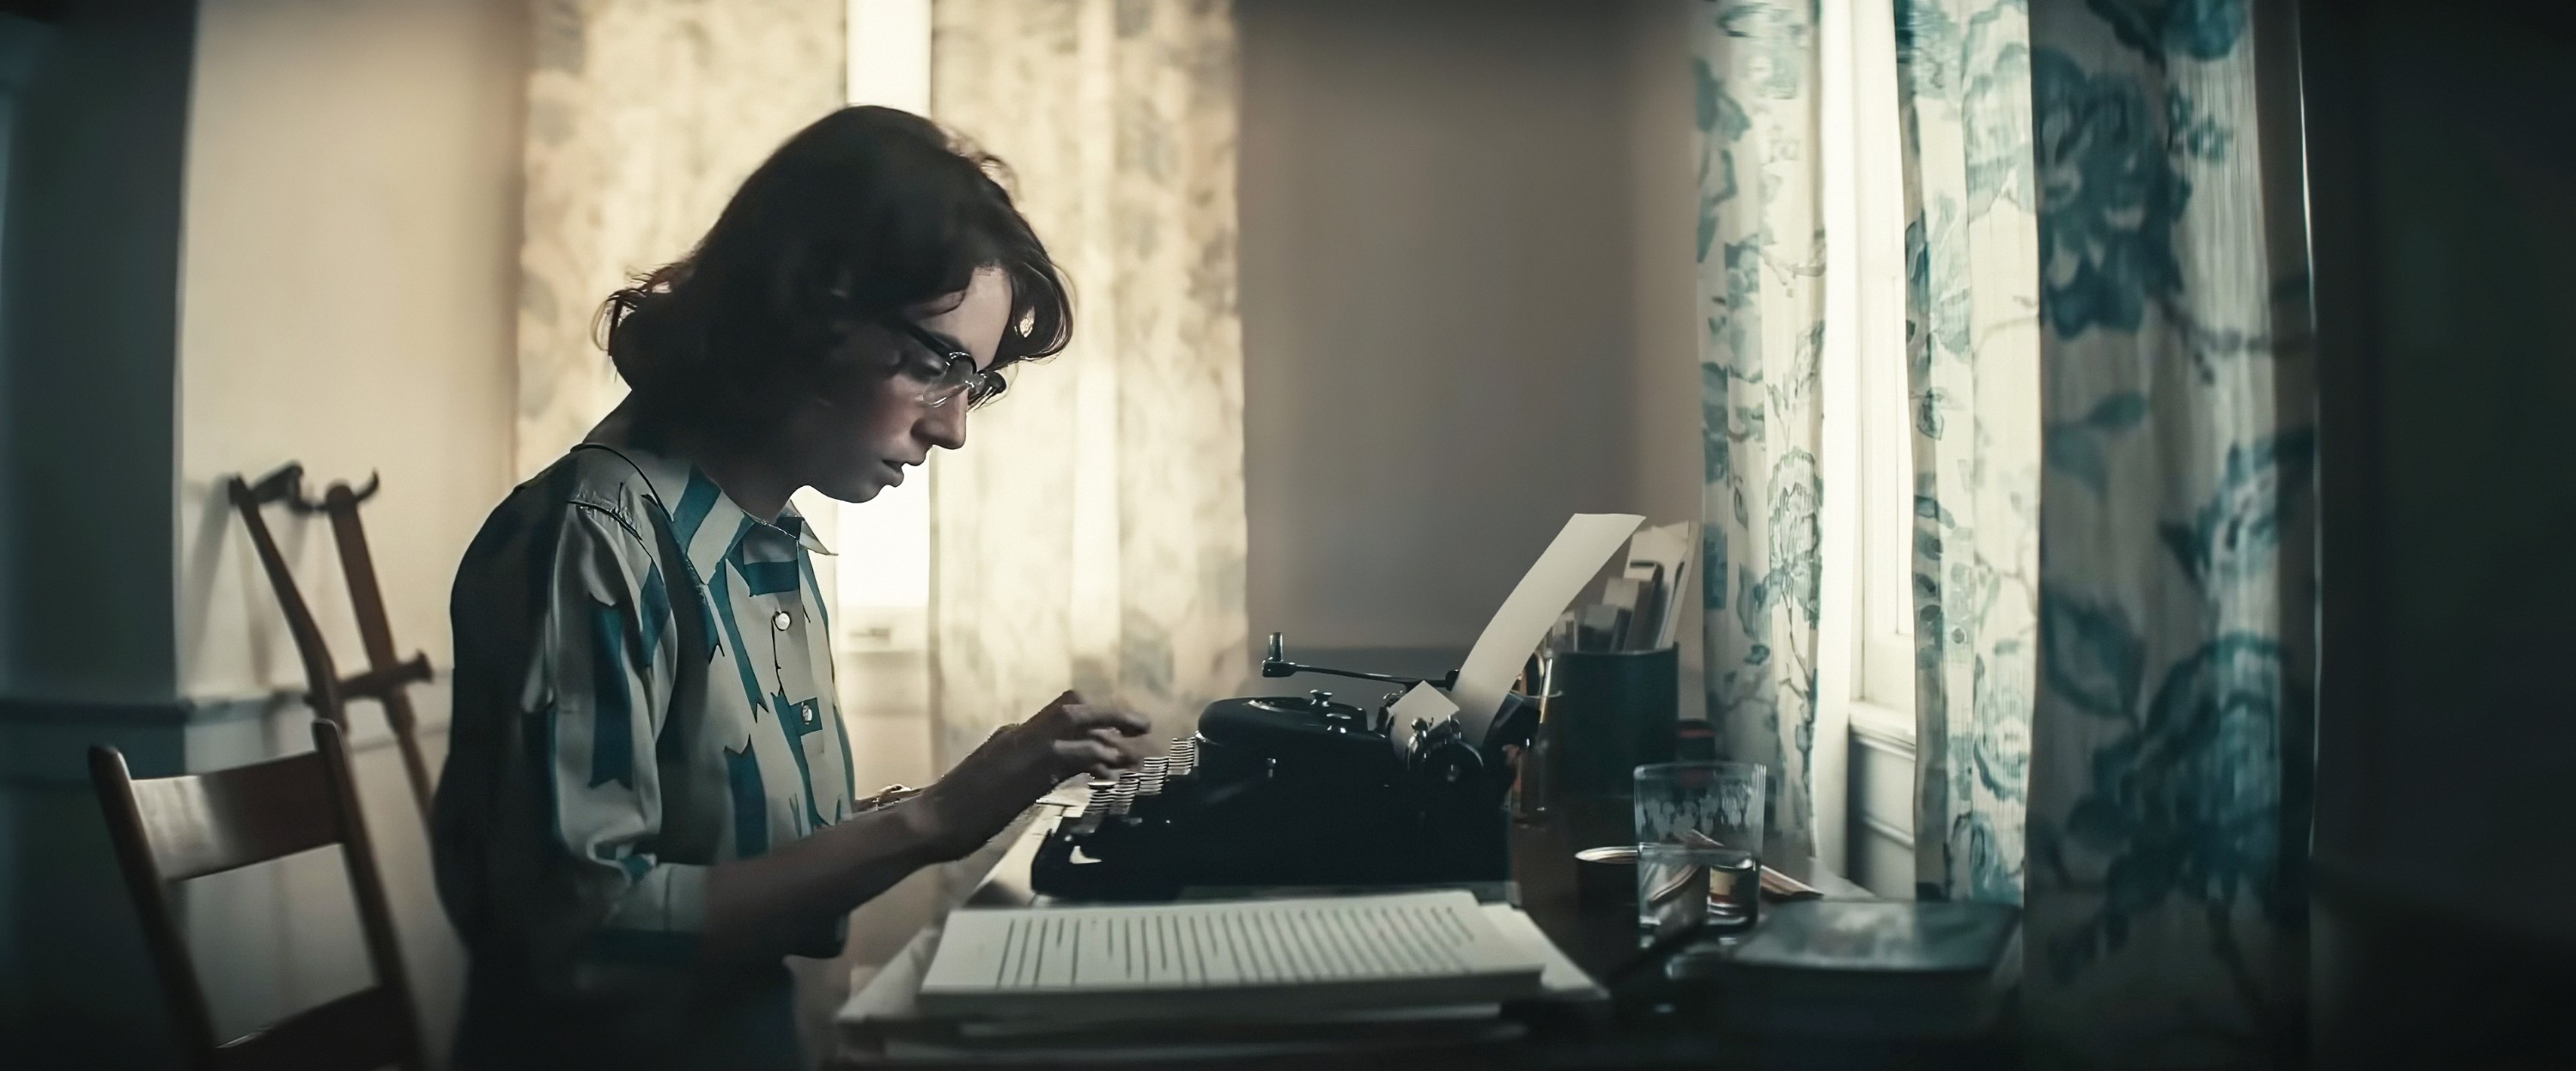 Maya Hawke as Flannery O’Connor, leaning over a typewriter